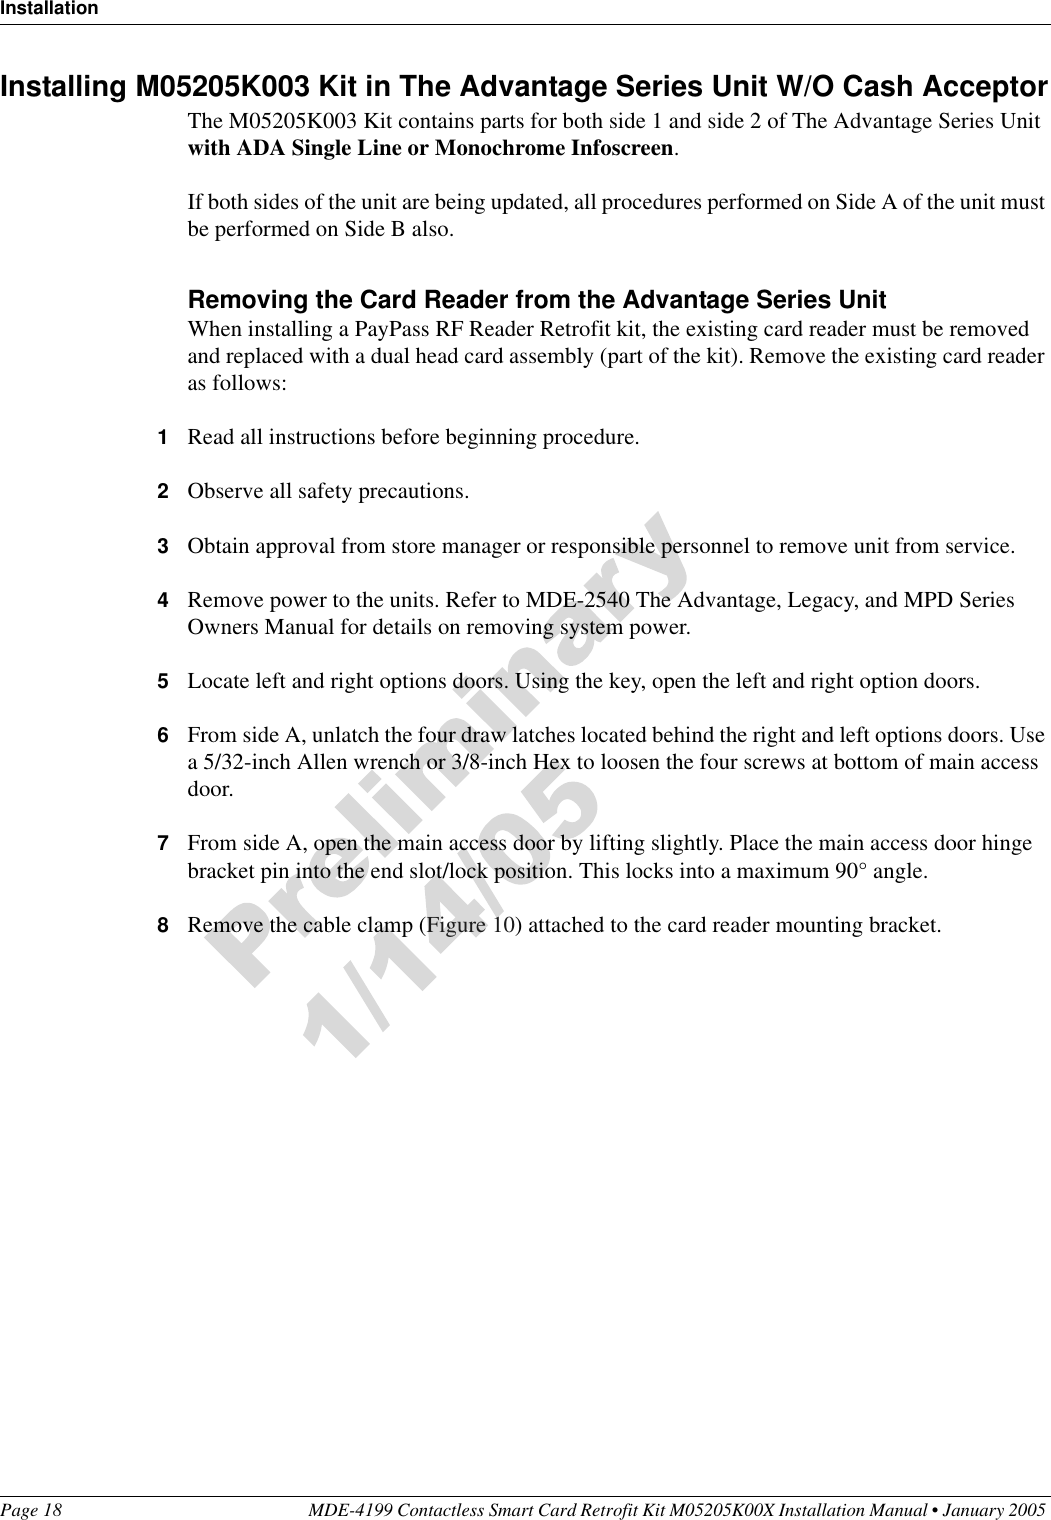 InstallationPage 18 MDE-4199 Contactless Smart Card Retrofit Kit M05205K00X Installation Manual • January 2005 Installing M05205K003 Kit in The Advantage Series Unit W/O Cash AcceptorThe M05205K003 Kit contains parts for both side 1 and side 2 of The Advantage Series Unit with ADA Single Line or Monochrome Infoscreen.If both sides of the unit are being updated, all procedures performed on Side A of the unit must be performed on Side B also.Removing the Card Reader from the Advantage Series UnitWhen installing a PayPass RF Reader Retrofit kit, the existing card reader must be removed and replaced with a dual head card assembly (part of the kit). Remove the existing card reader as follows:1Read all instructions before beginning procedure.2Observe all safety precautions.3Obtain approval from store manager or responsible personnel to remove unit from service.4Remove power to the units. Refer to MDE-2540 The Advantage, Legacy, and MPD Series Owners Manual for details on removing system power.5Locate left and right options doors. Using the key, open the left and right option doors.6From side A, unlatch the four draw latches located behind the right and left options doors. Use a 5/32-inch Allen wrench or 3/8-inch Hex to loosen the four screws at bottom of main access door.7From side A, open the main access door by lifting slightly. Place the main access door hinge bracket pin into the end slot/lock position. This locks into a maximum 90° angle.8Remove the cable clamp (Figure 10) attached to the card reader mounting bracket.